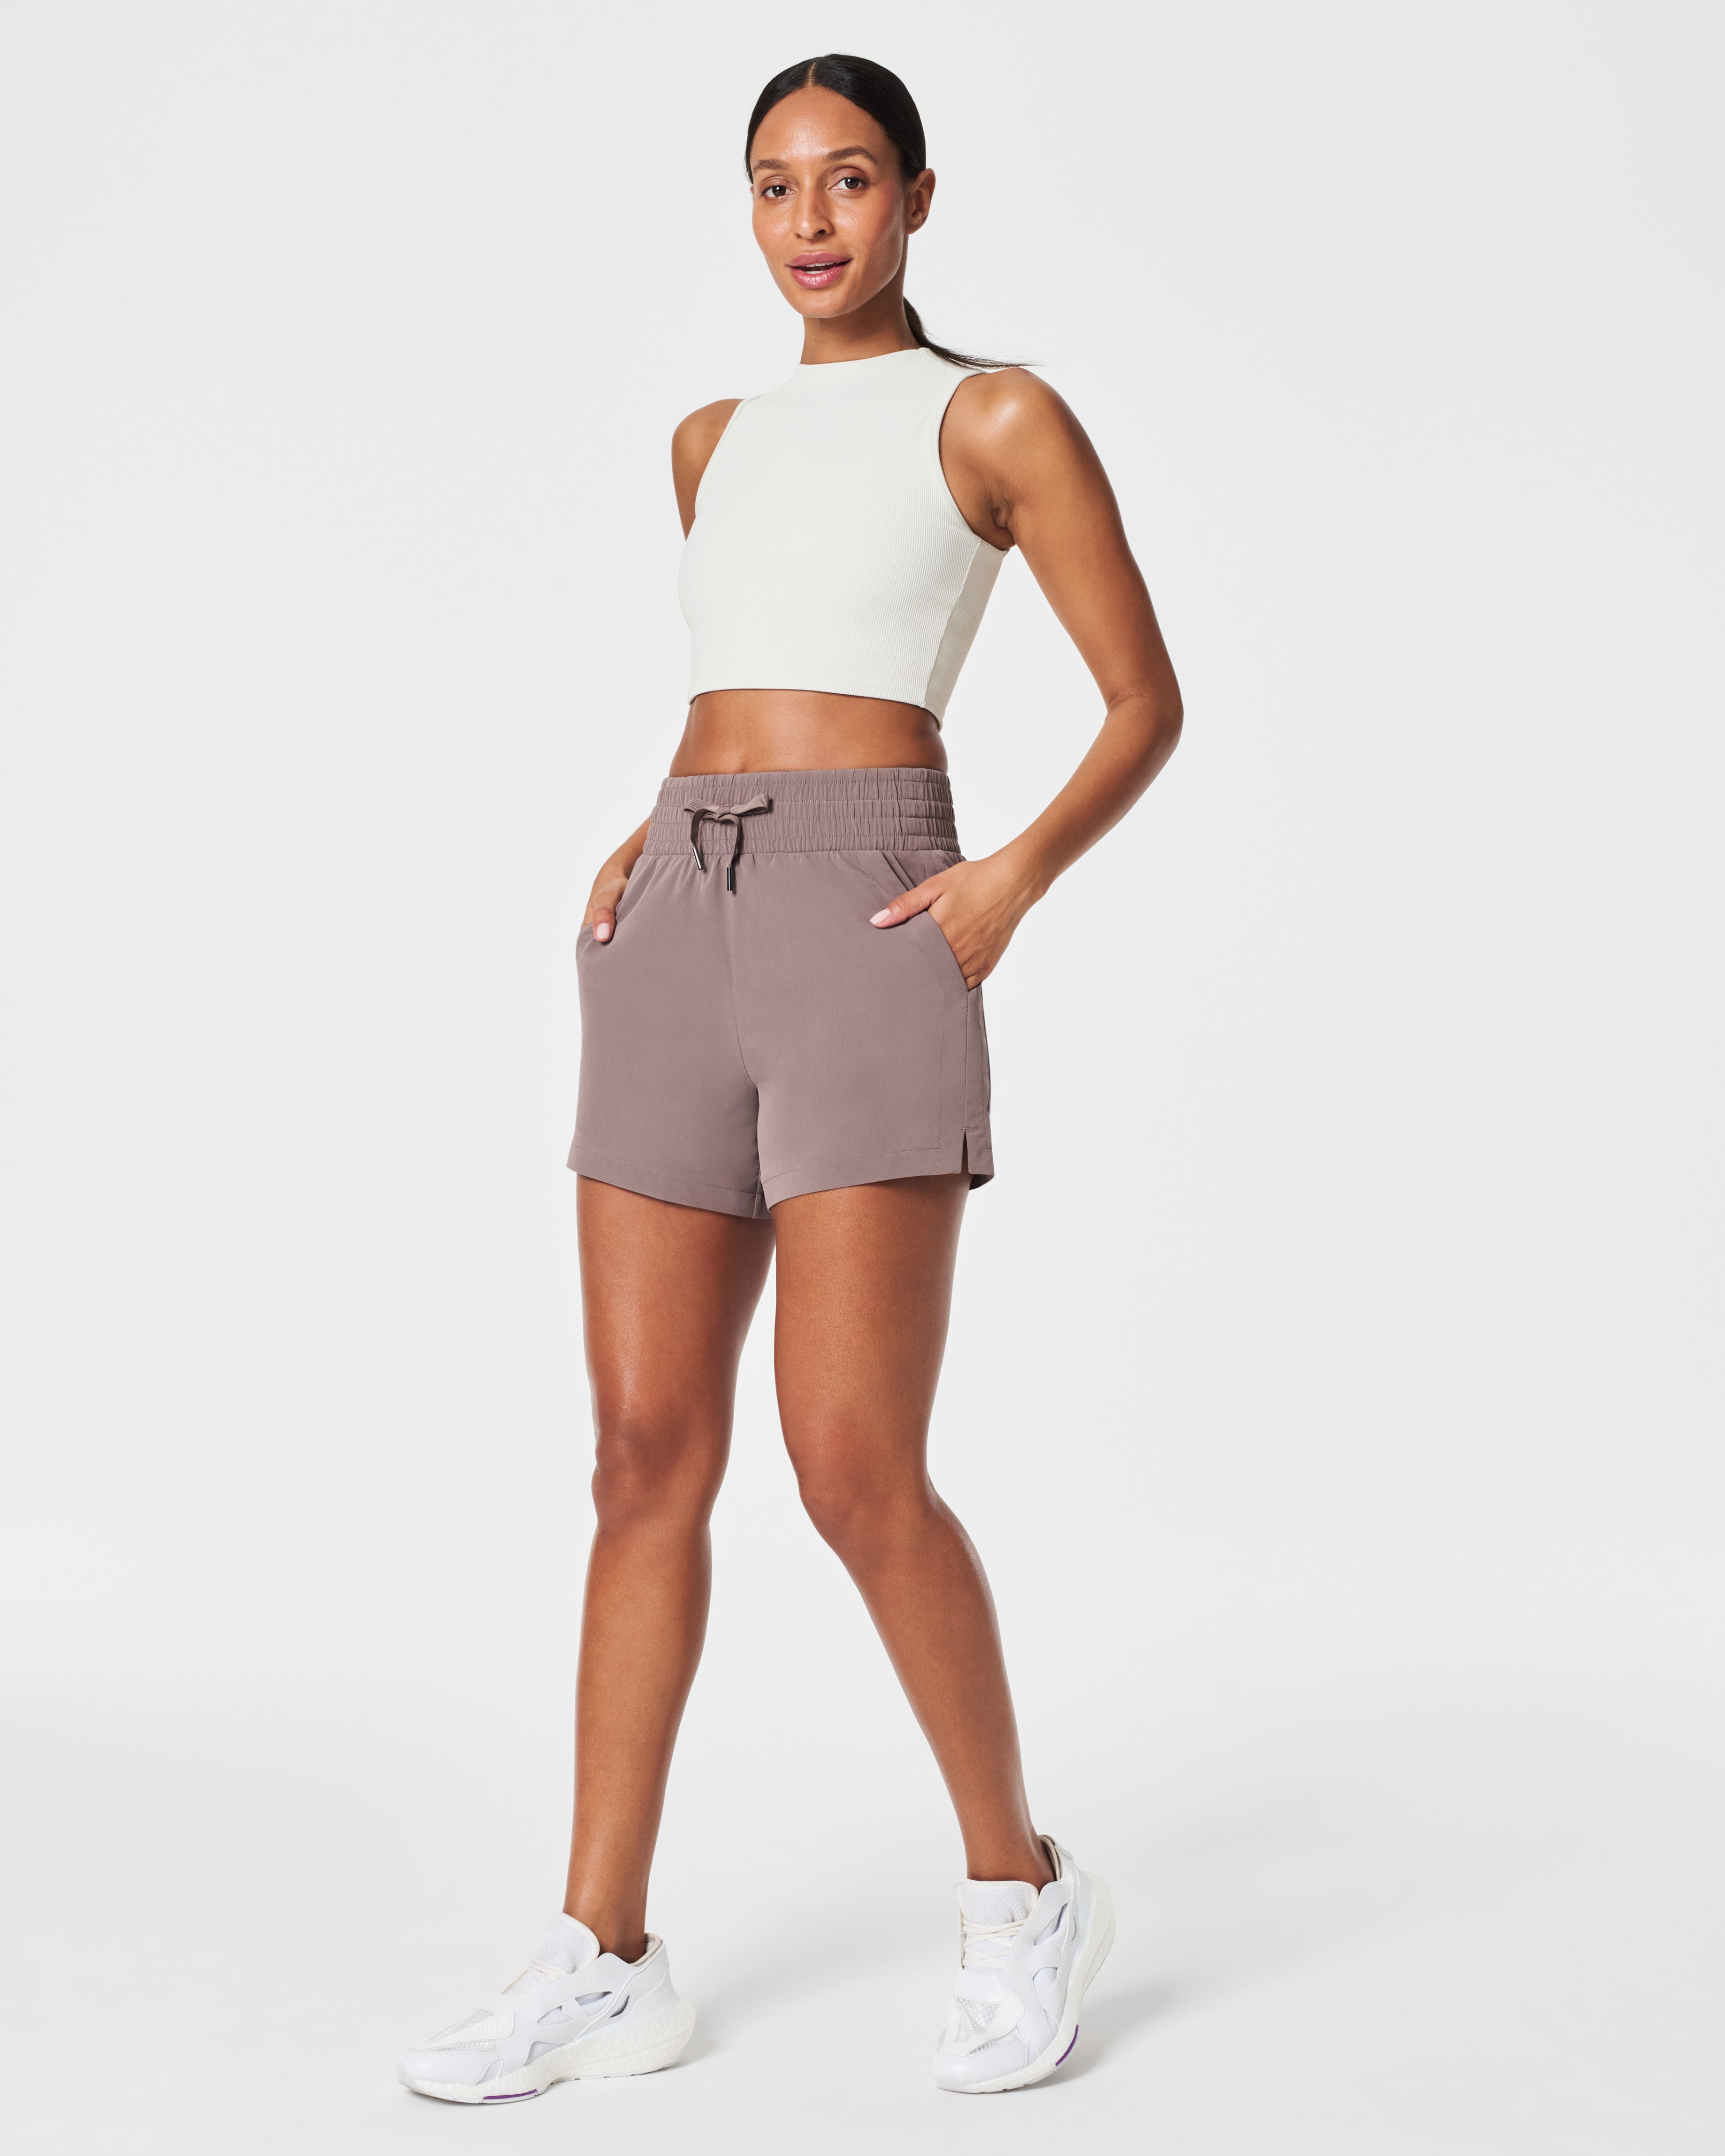 Spanx Launched a New Athleisure Line, Casual Fridays